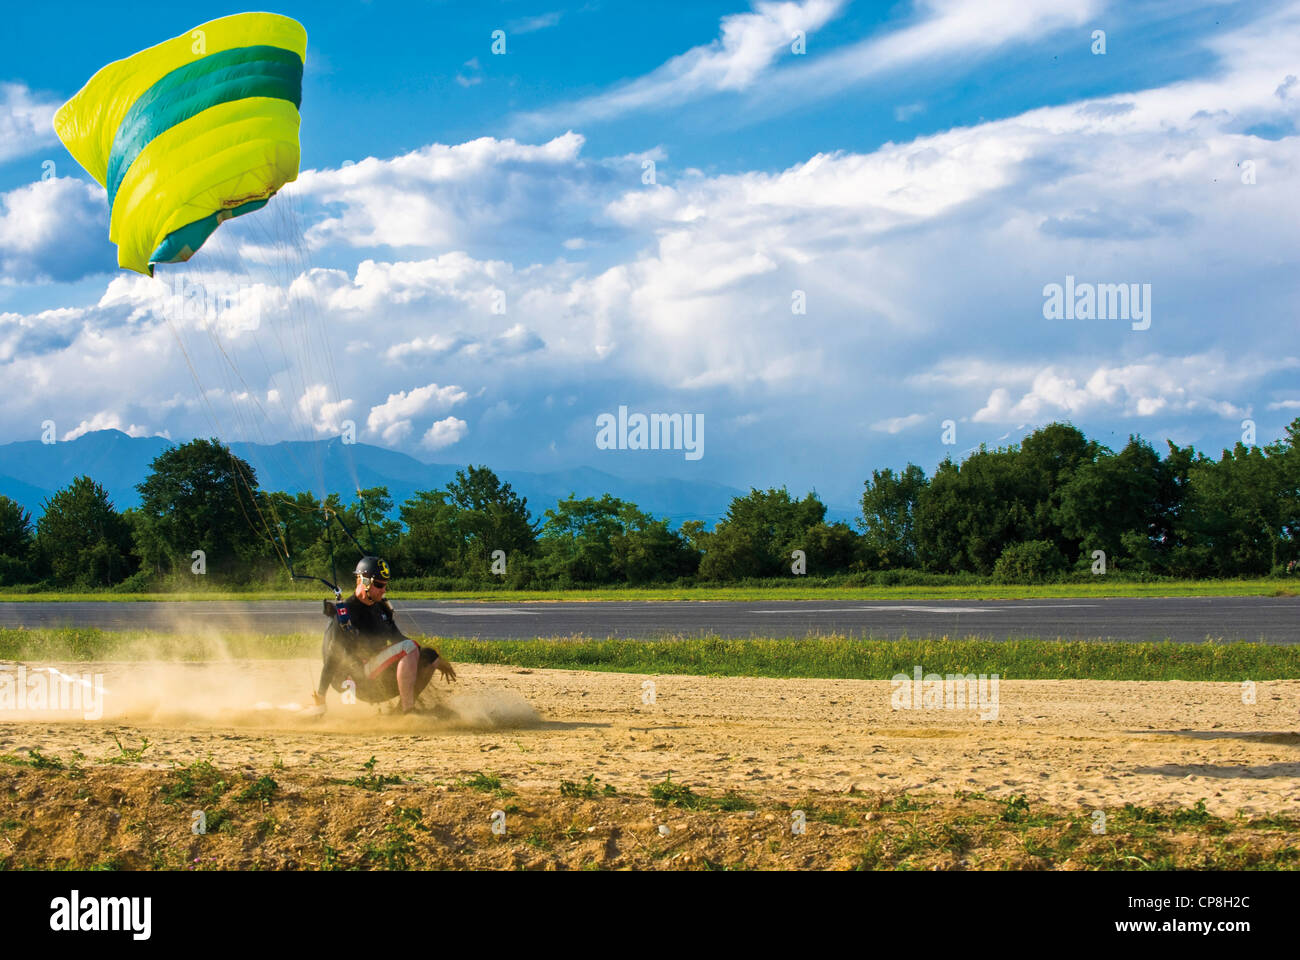 Europe Italy Piedmont Turin  airport of Collegno Word Air Games 2009  parachuting Stock Photo